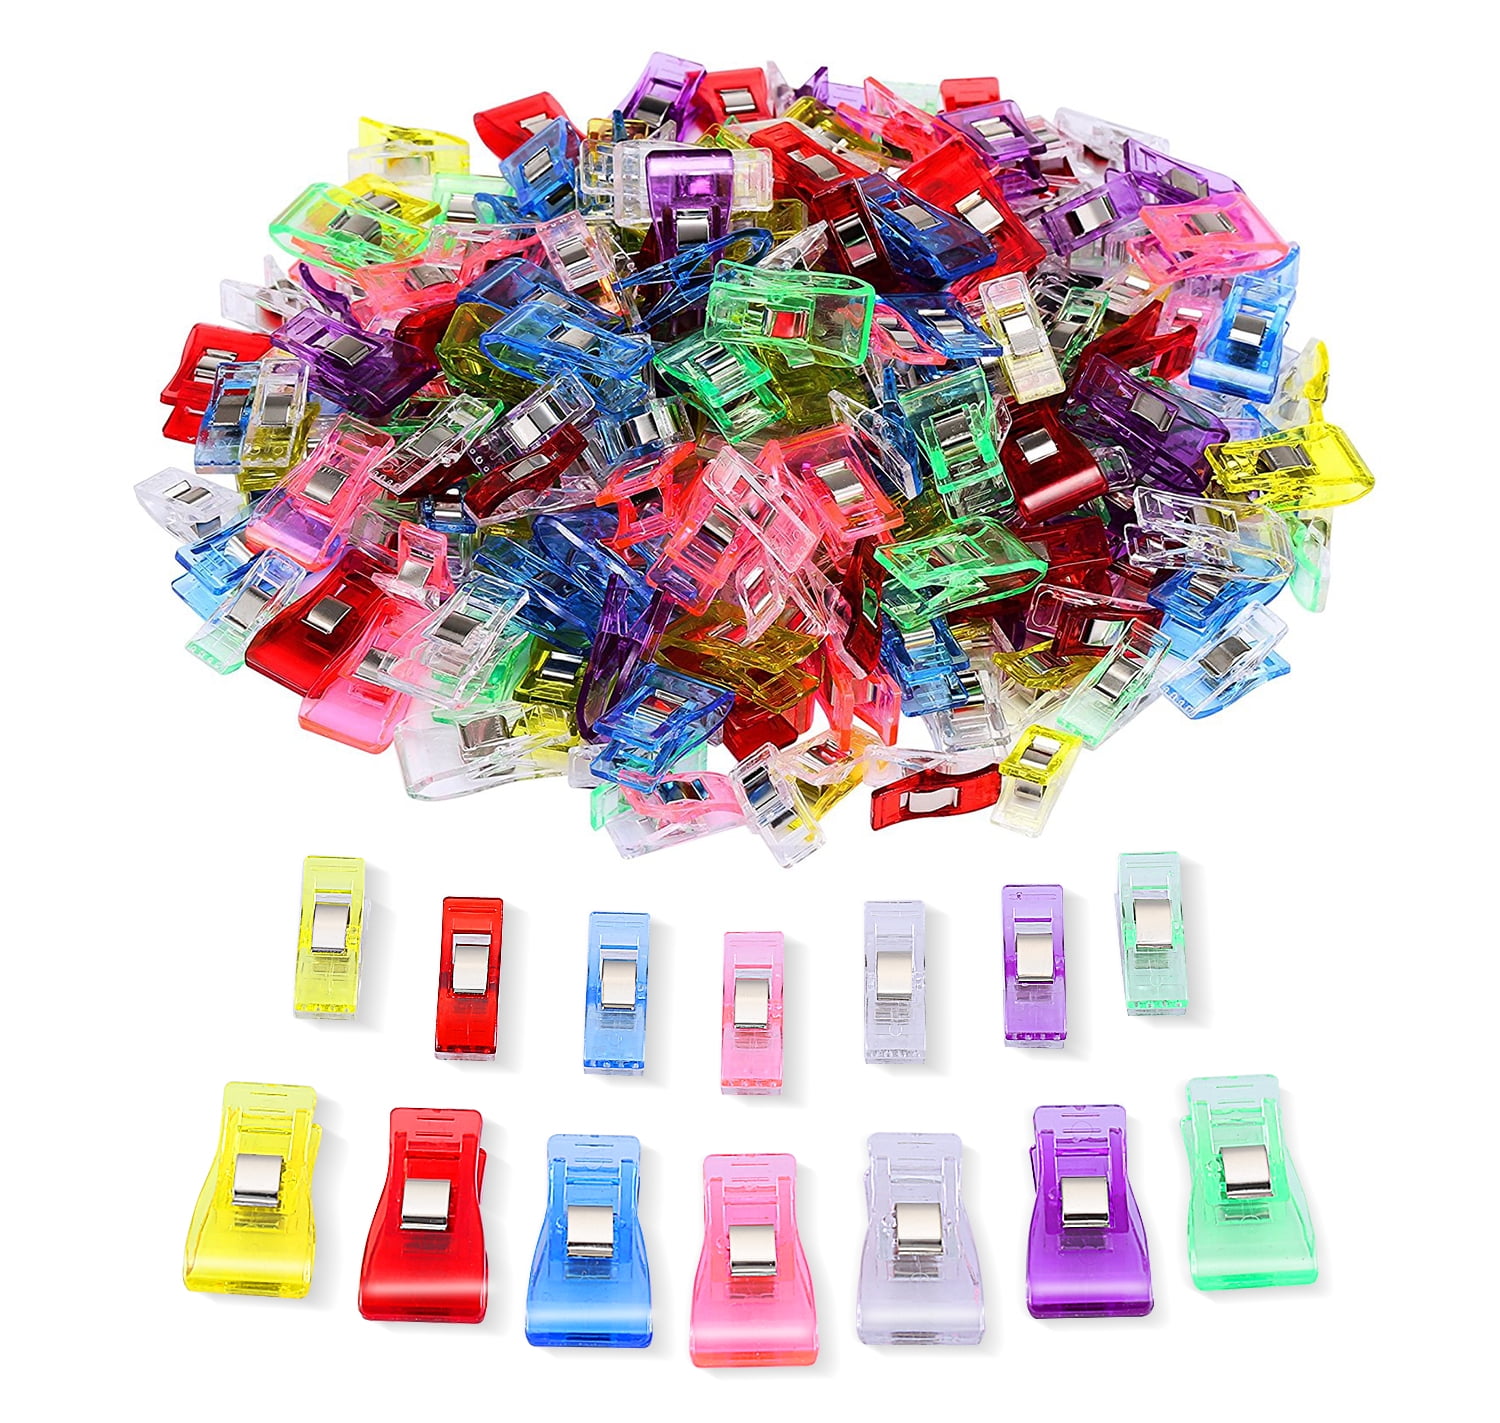 Safety Clips YZNlife 100pcs Fabric Clips Dyed Clips Sewing Clips Sewing Accessories Fabric Clips Wonder Clips Quilt Clips Colorful Clips Plastic Clips for Crochet Knitting 